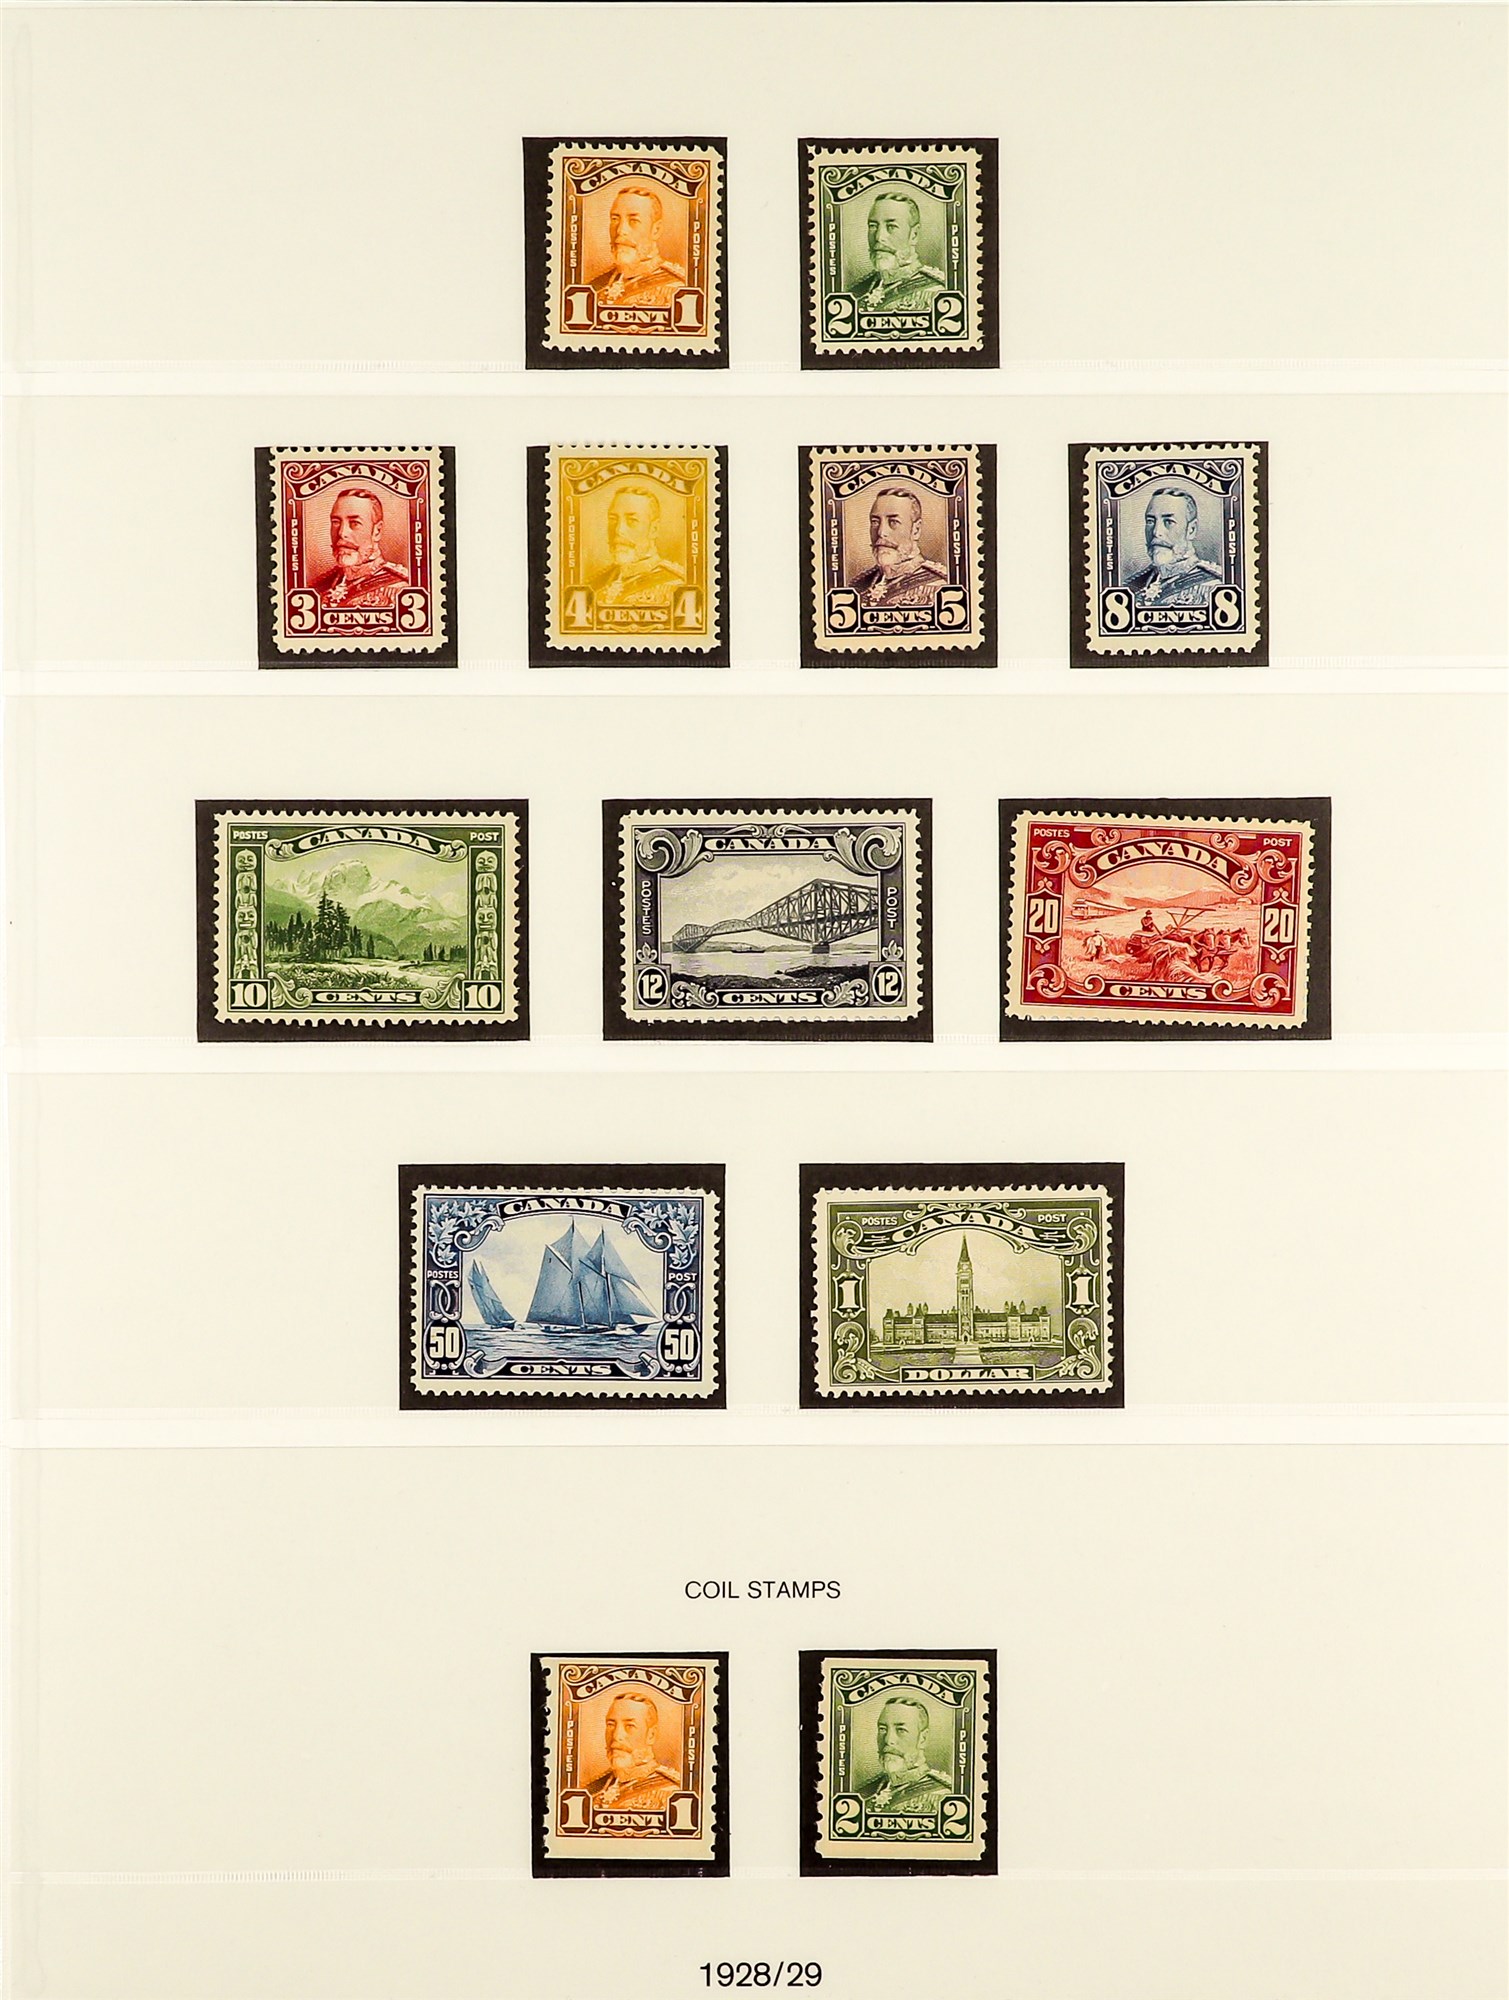 CANADA 1911 - 1936 MINT / NEVER HINGED MINT COLLECTION of around 150 stamps on hingeless pages,